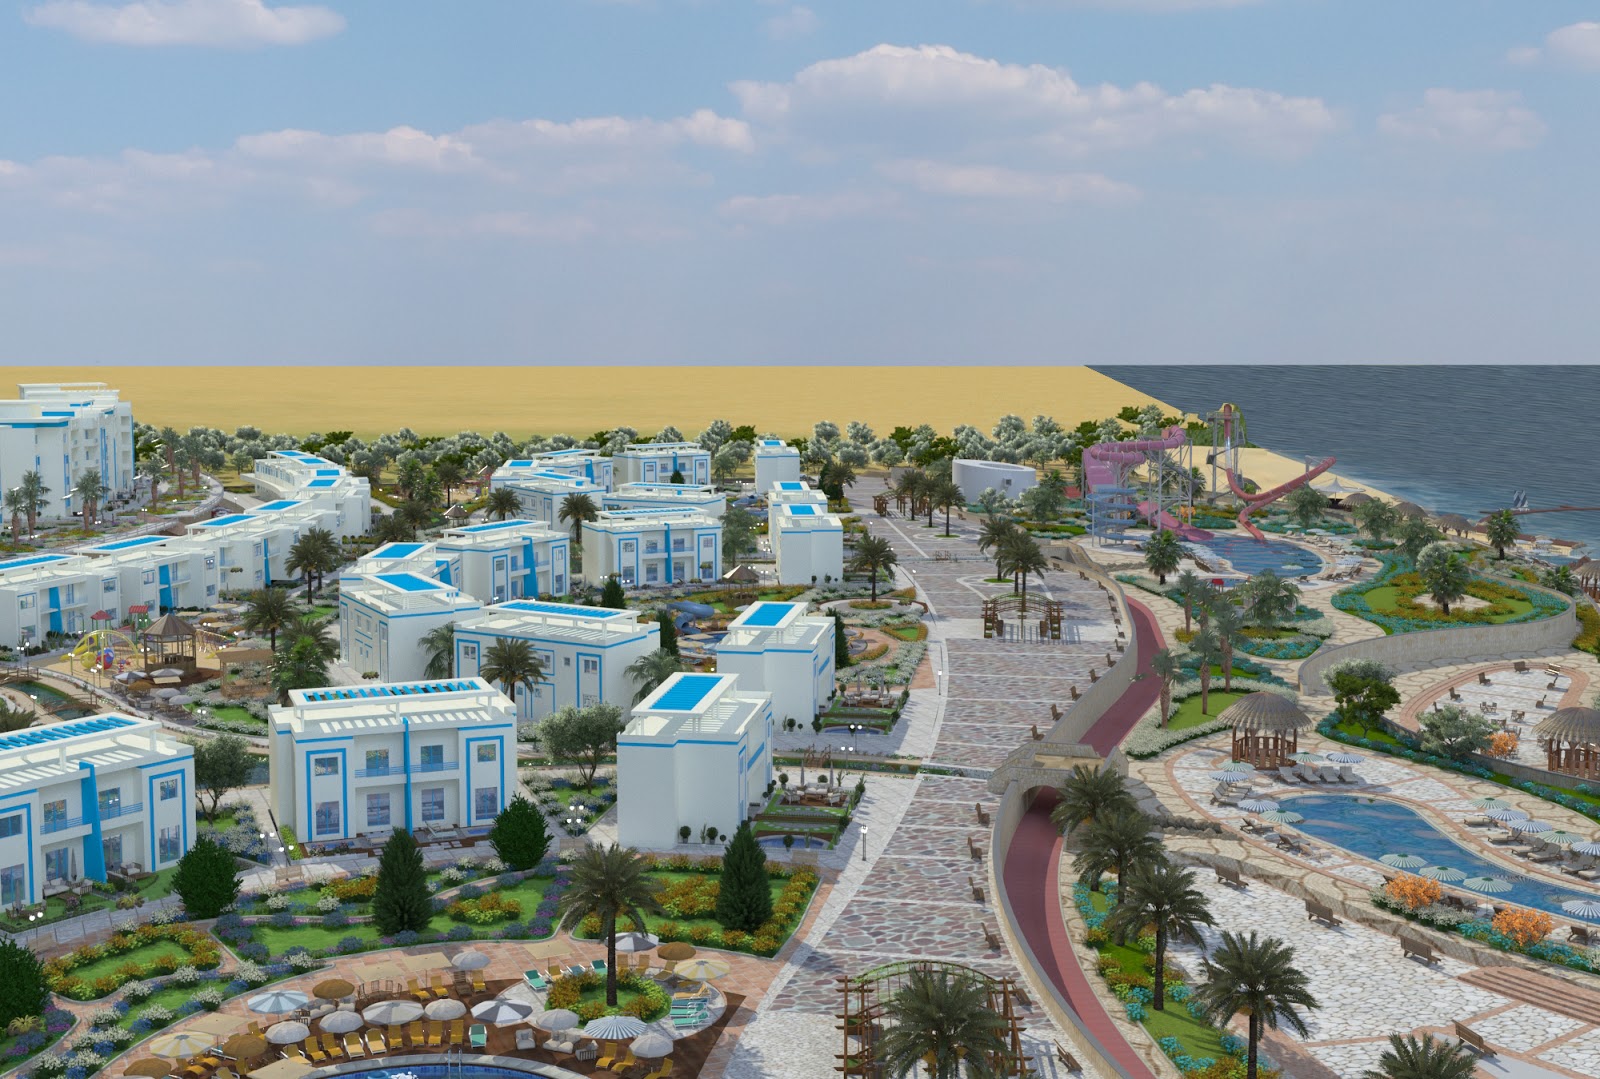 With an area of 72 m² chalets for sale in Sea View Resort